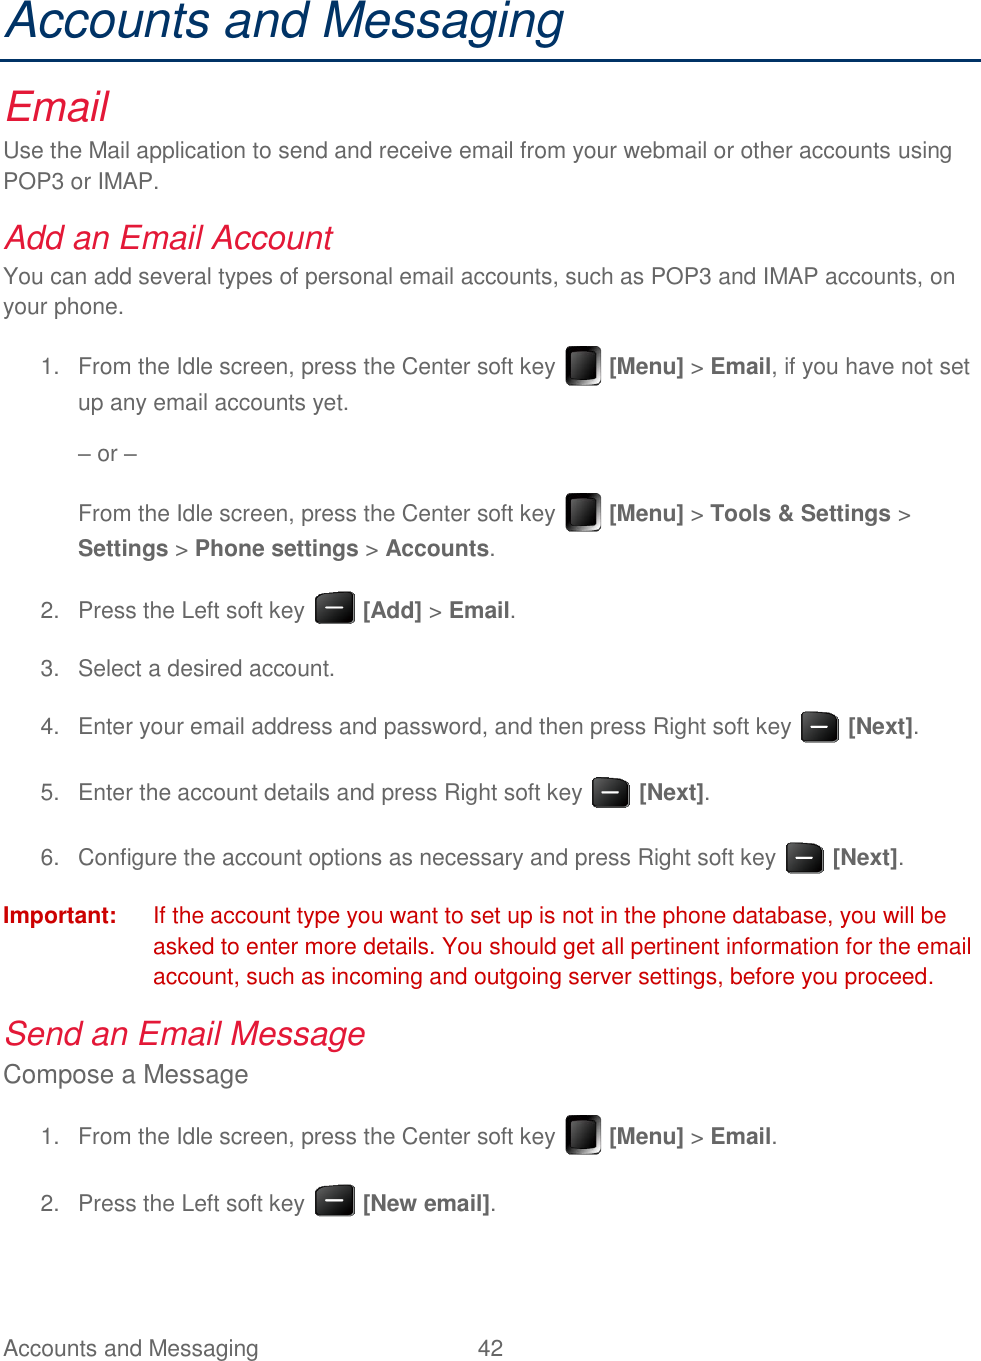 Accounts and Messaging  42   Accounts and Messaging Email Use the Mail application to send and receive email from your webmail or other accounts using POP3 or IMAP. Add an Email Account You can add several types of personal email accounts, such as POP3 and IMAP accounts, on your phone.   From the Idle screen, press the Center soft key   [Menu] &gt; Email, if you have not set 1.up any email accounts yet. – or – From the Idle screen, press the Center soft key   [Menu] &gt; Tools &amp; Settings &gt; Settings &gt; Phone settings &gt; Accounts.   Press the Left soft key   [Add] &gt; Email. 2.  Select a desired account. 3.  Enter your email address and password, and then press Right soft key   [Next]. 4.  Enter the account details and press Right soft key   [Next]. 5.  Configure the account options as necessary and press Right soft key   [Next]. 6.Important:  If the account type you want to set up is not in the phone database, you will be asked to enter more details. You should get all pertinent information for the email account, such as incoming and outgoing server settings, before you proceed. Send an Email Message Compose a Message   From the Idle screen, press the Center soft key   [Menu] &gt; Email. 1.  Press the Left soft key   [New email]. 2.